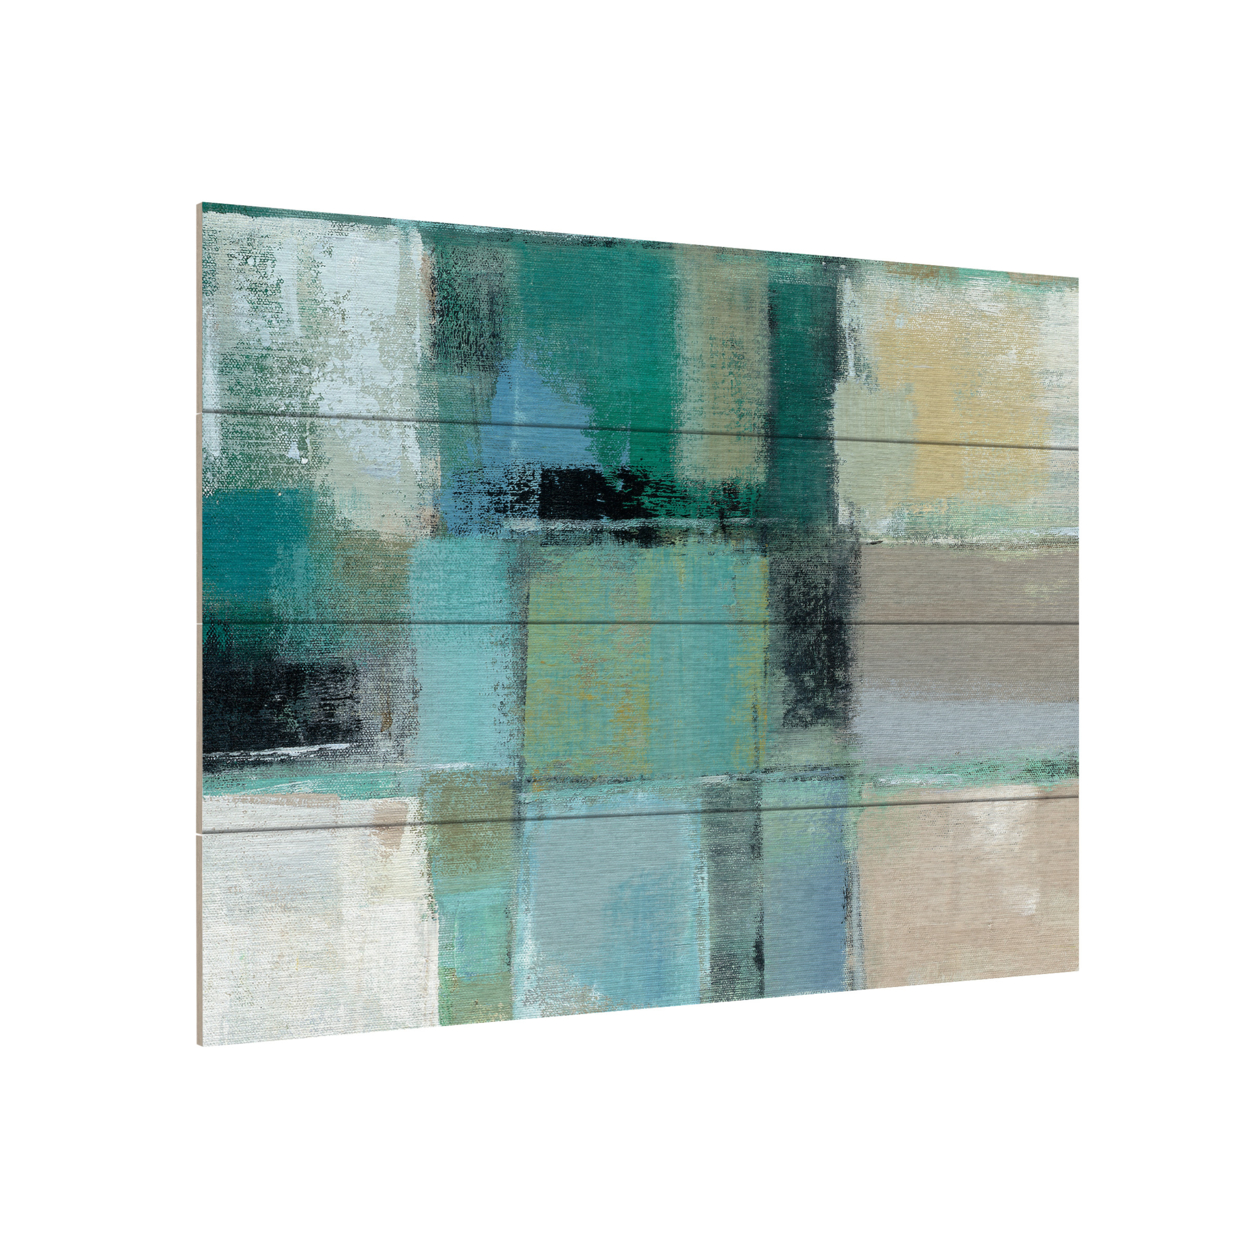 Wall Art 12 X 16 Inches Titled Island Hues Crop II Ready To Hang Printed On Wooden Planks